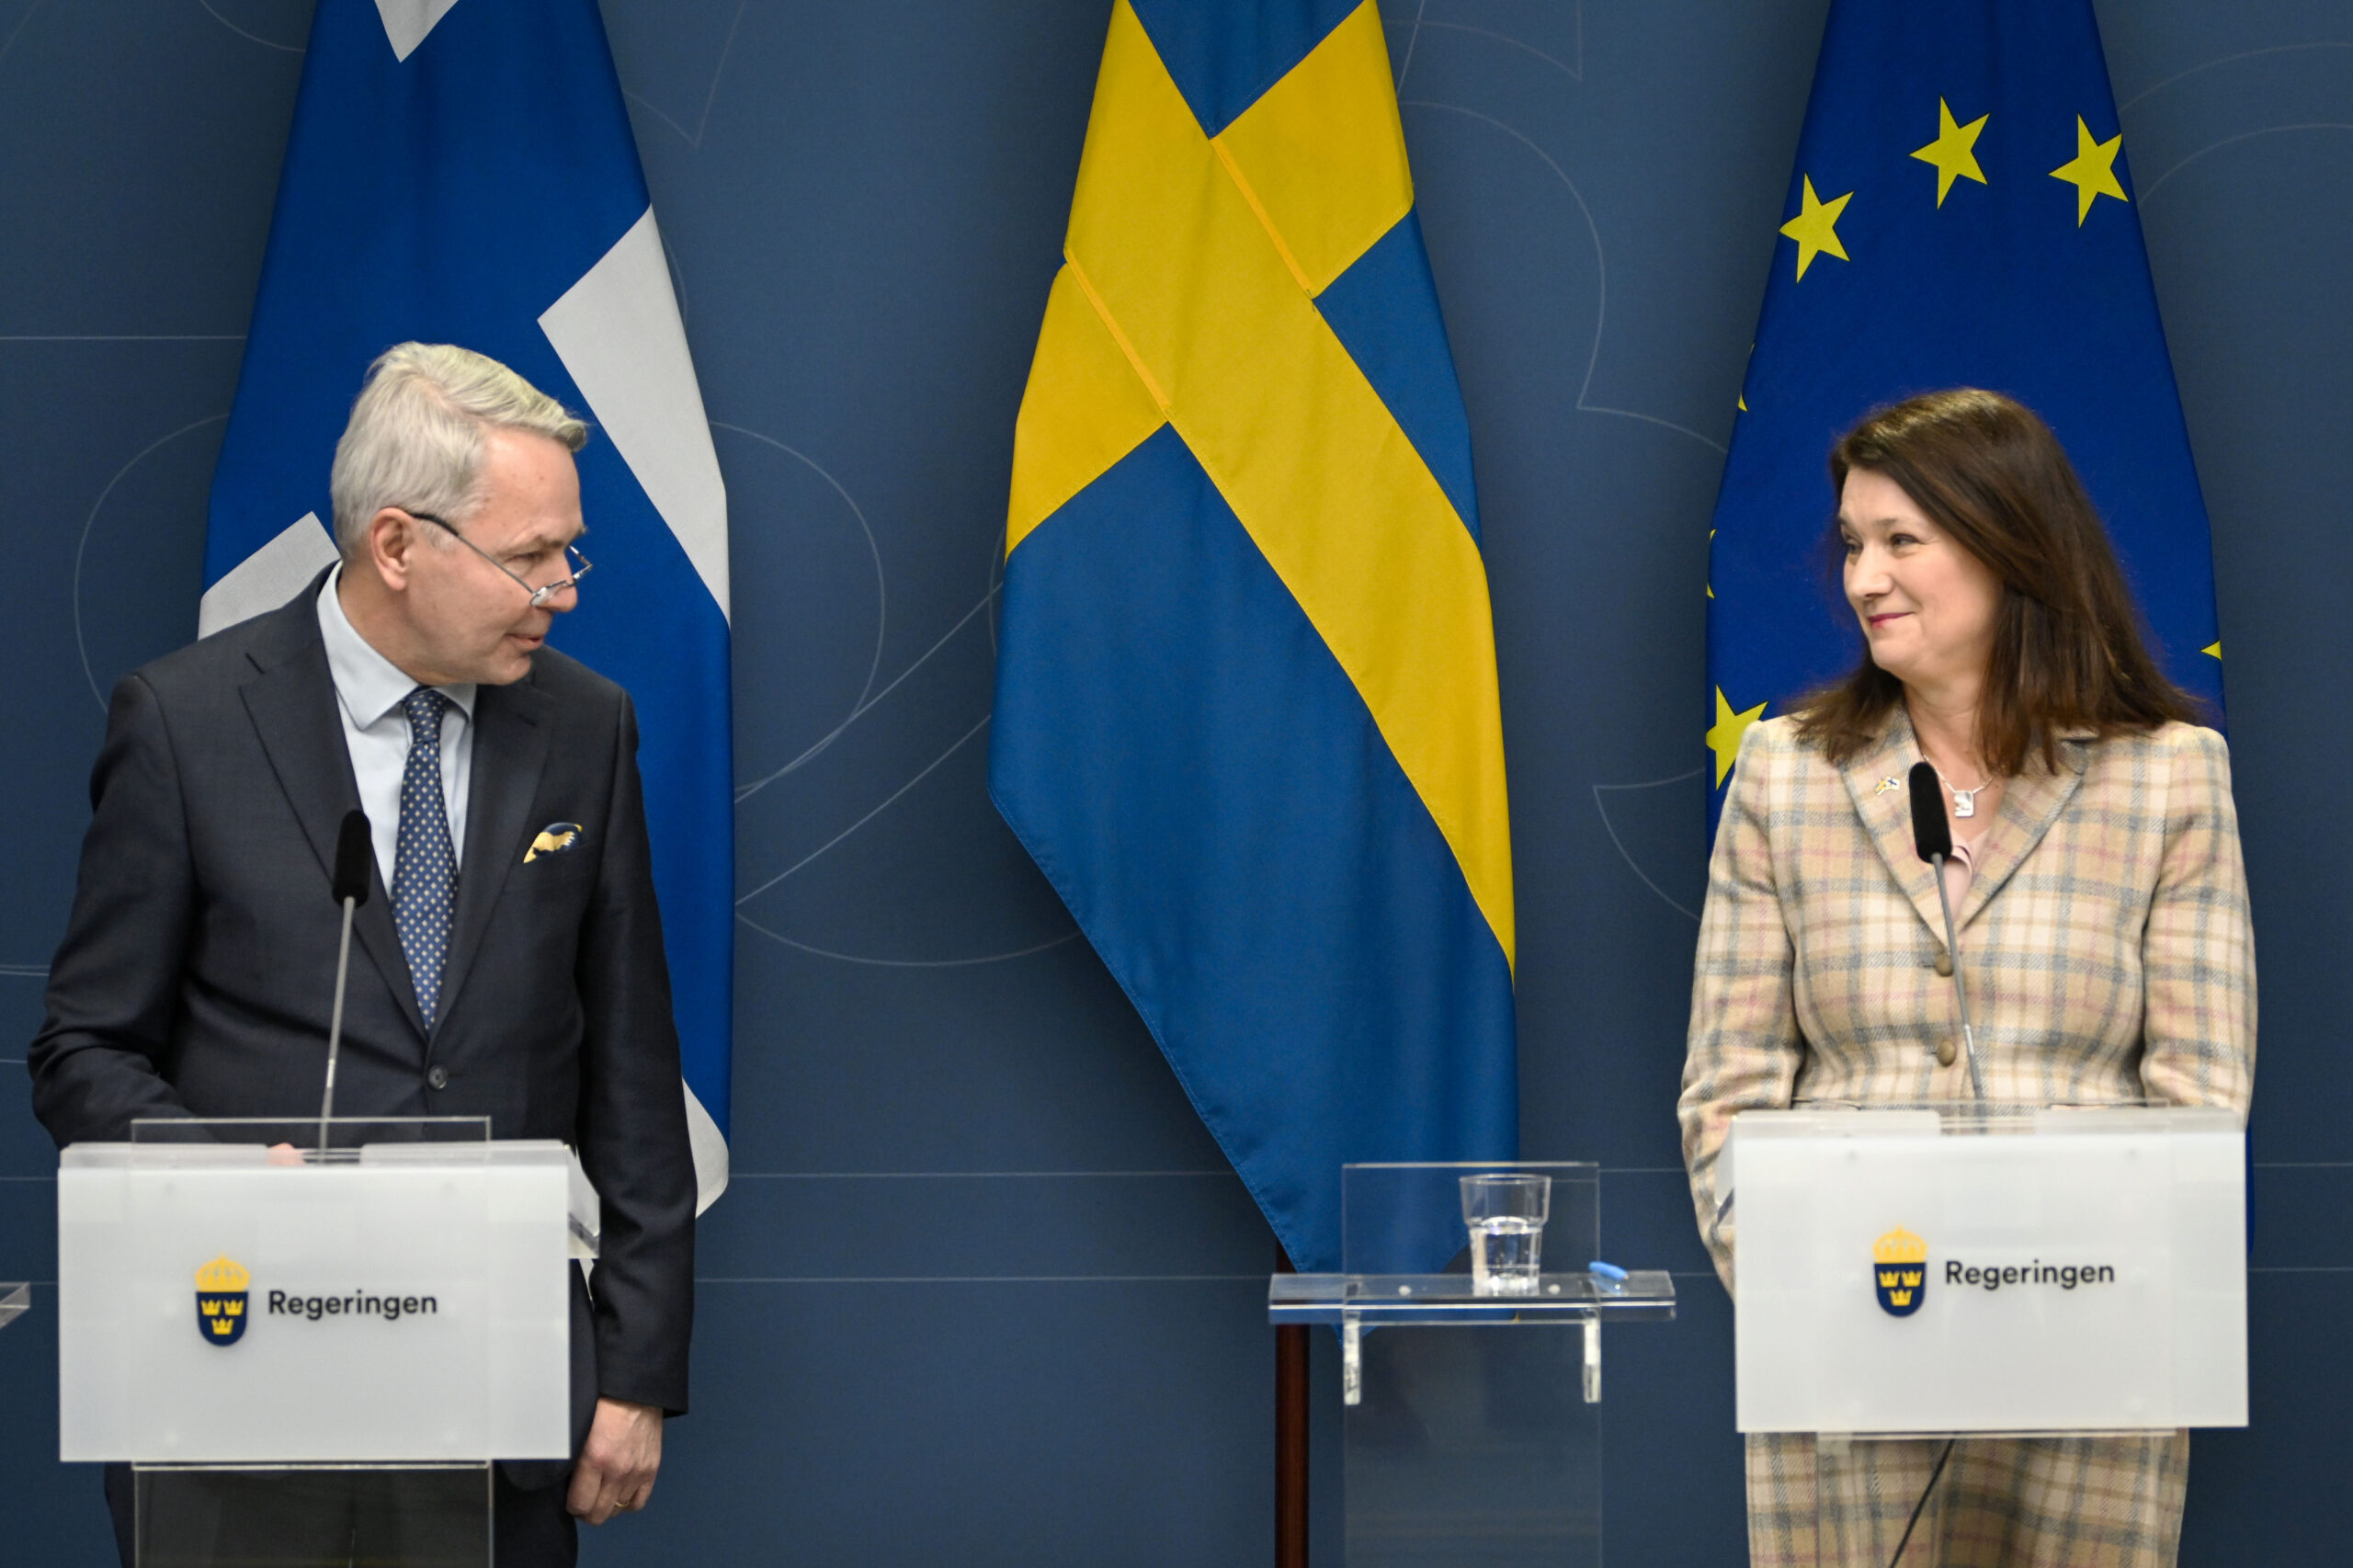 FILE - Finland's Minister for Foreign Affairs Pekka Haavisto, left and his Swedish counterpart Ann Linde take part in a joint press conference with Sweden's Defence Minister Peter Hultqvist, and his Finnish counterpart Antti Kaikkonen, in Stockholm, Sweden, Feb. 2, 2022, after talks on European security. Throughout the Cold War and in the decades since it ended, nothing could persuade Finns and Swedes that they would be better off joining NATO, until now. Russia’s invasion of Ukraine has profoundly changed Europe’s security outlook, including for Nordic neutrals Finland and Sweden, where support for joining NATO has surged to record levels. (Anders Wiklund, TT News Agency via AP, File)